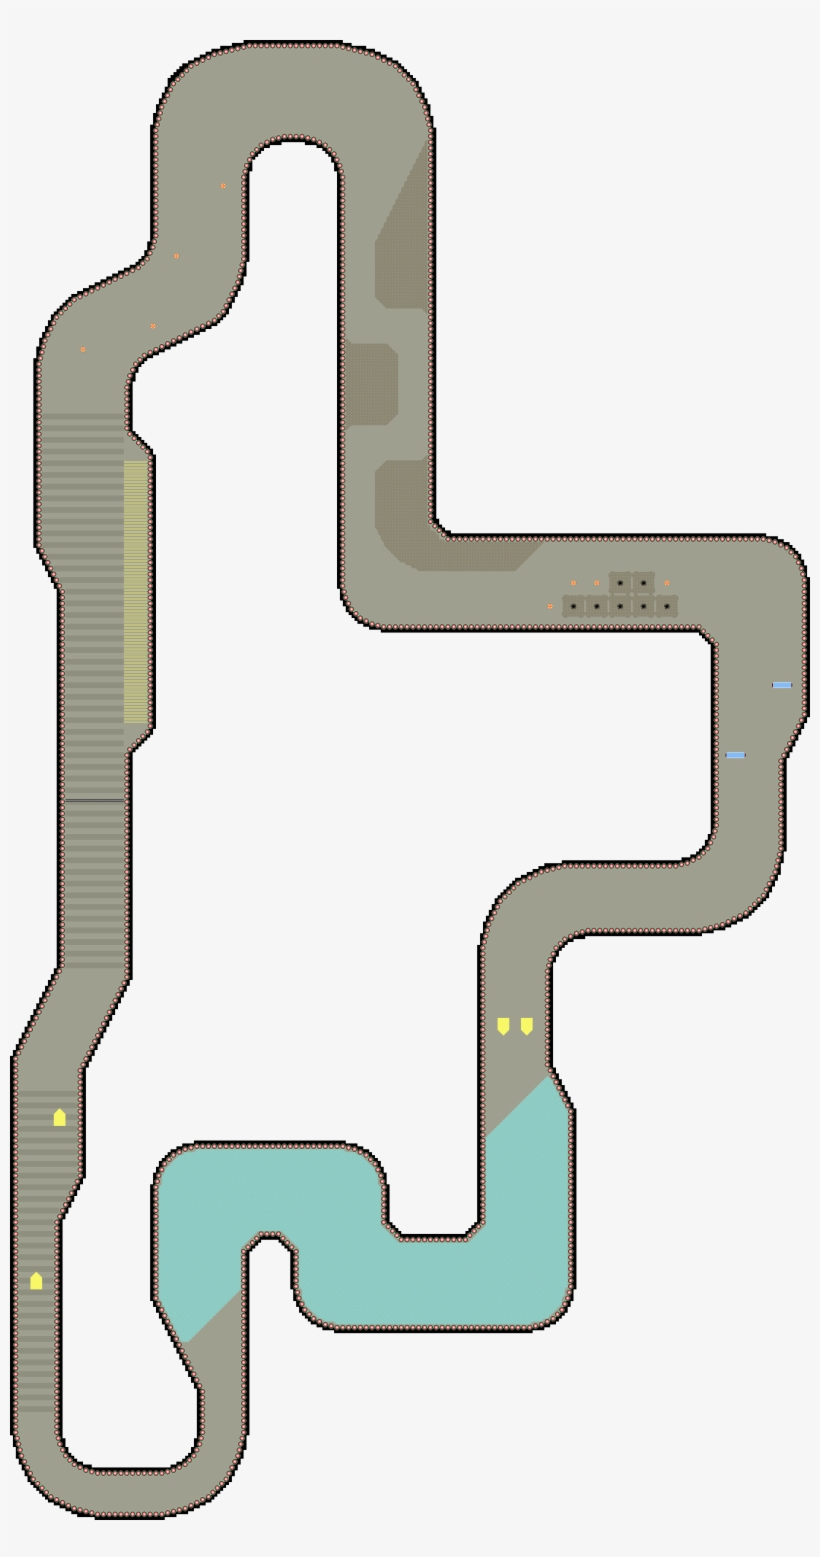 A 1 To 1 Recreation Of Mv's Championship Circuit For - Number, transparent png #4225952